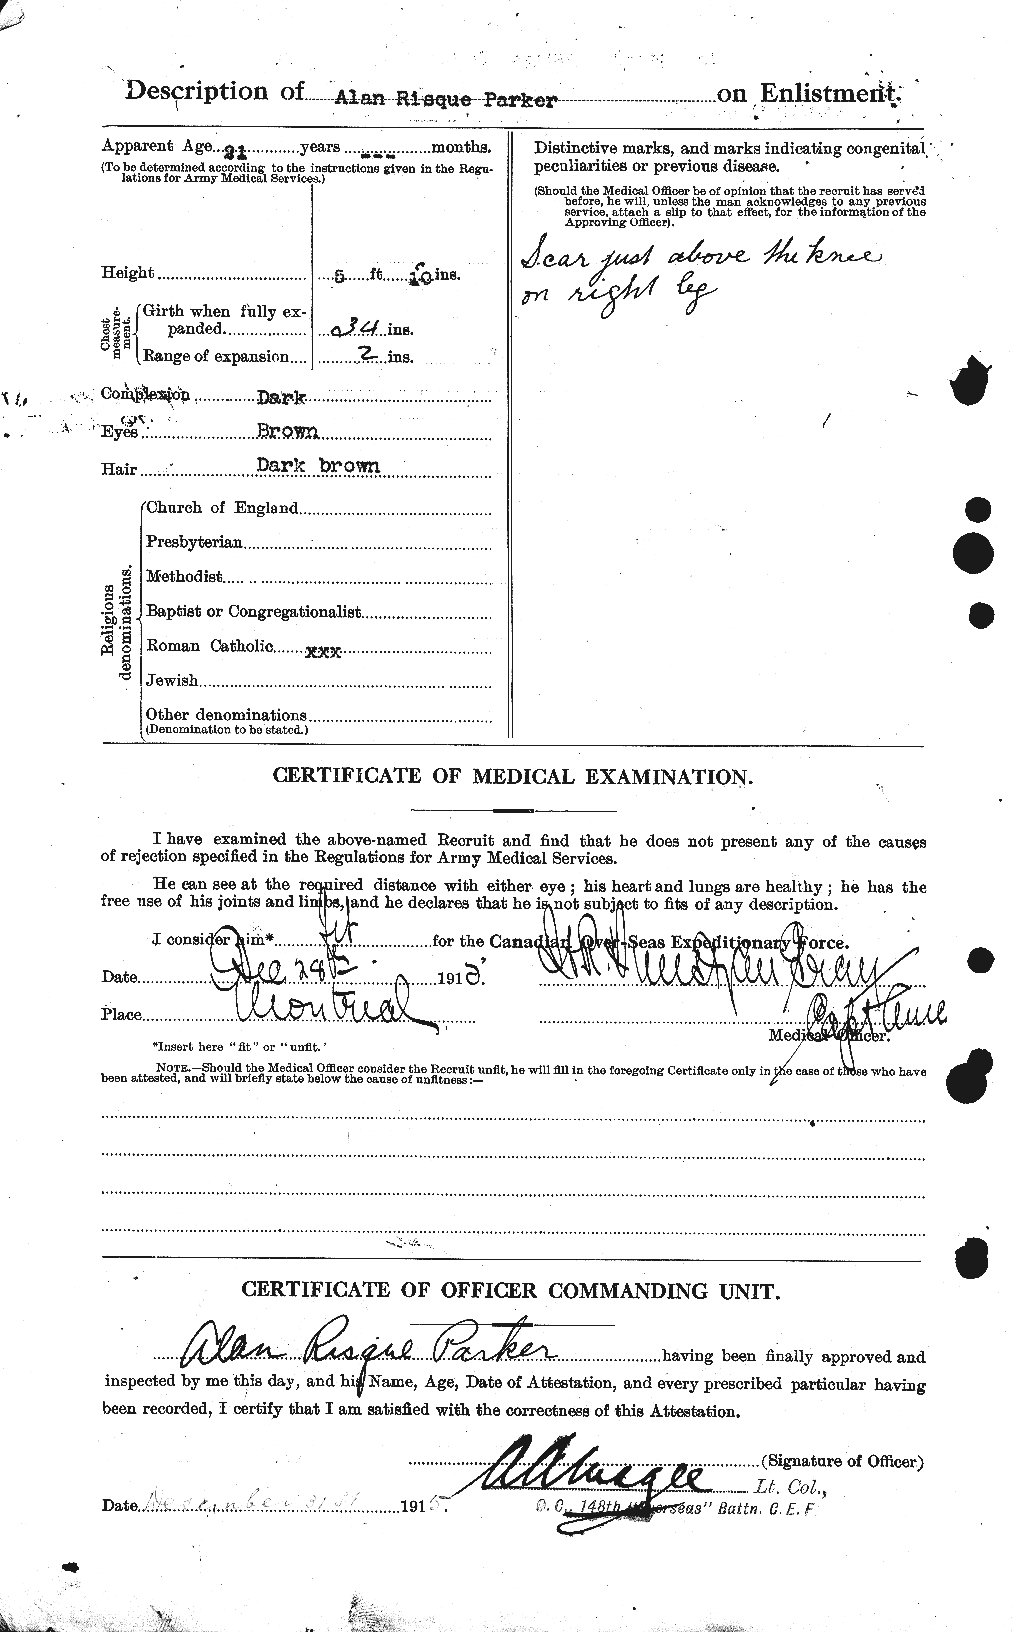 Personnel Records of the First World War - CEF 564957b